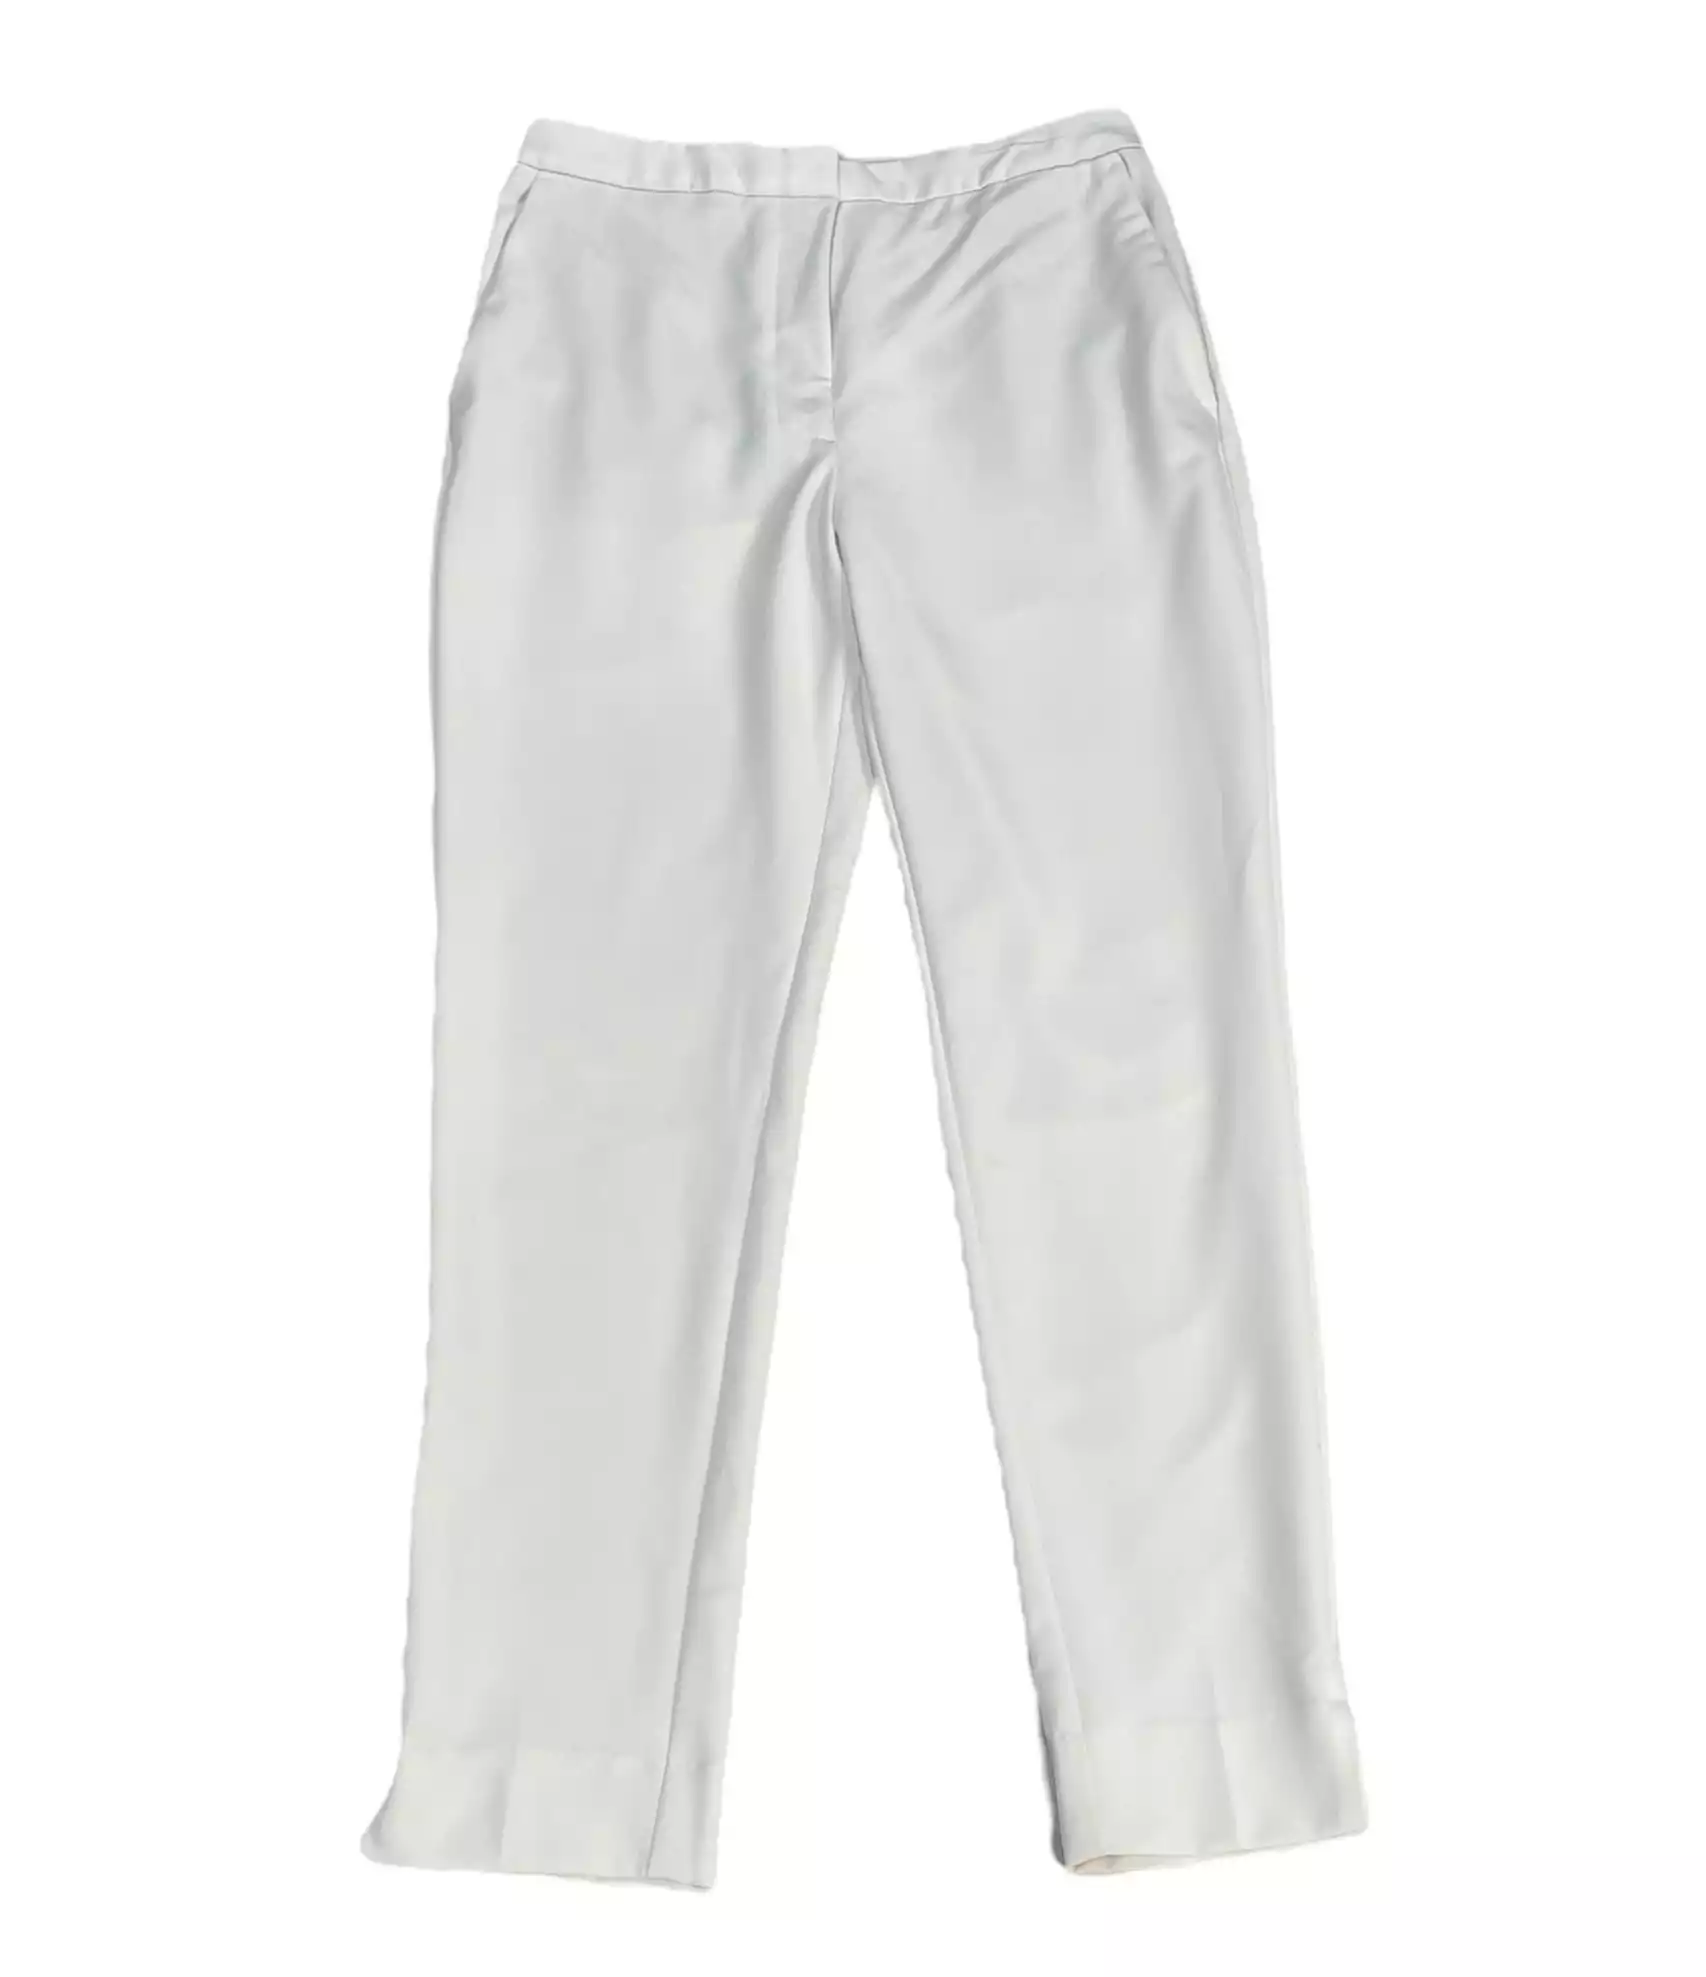 Trousers by Mango